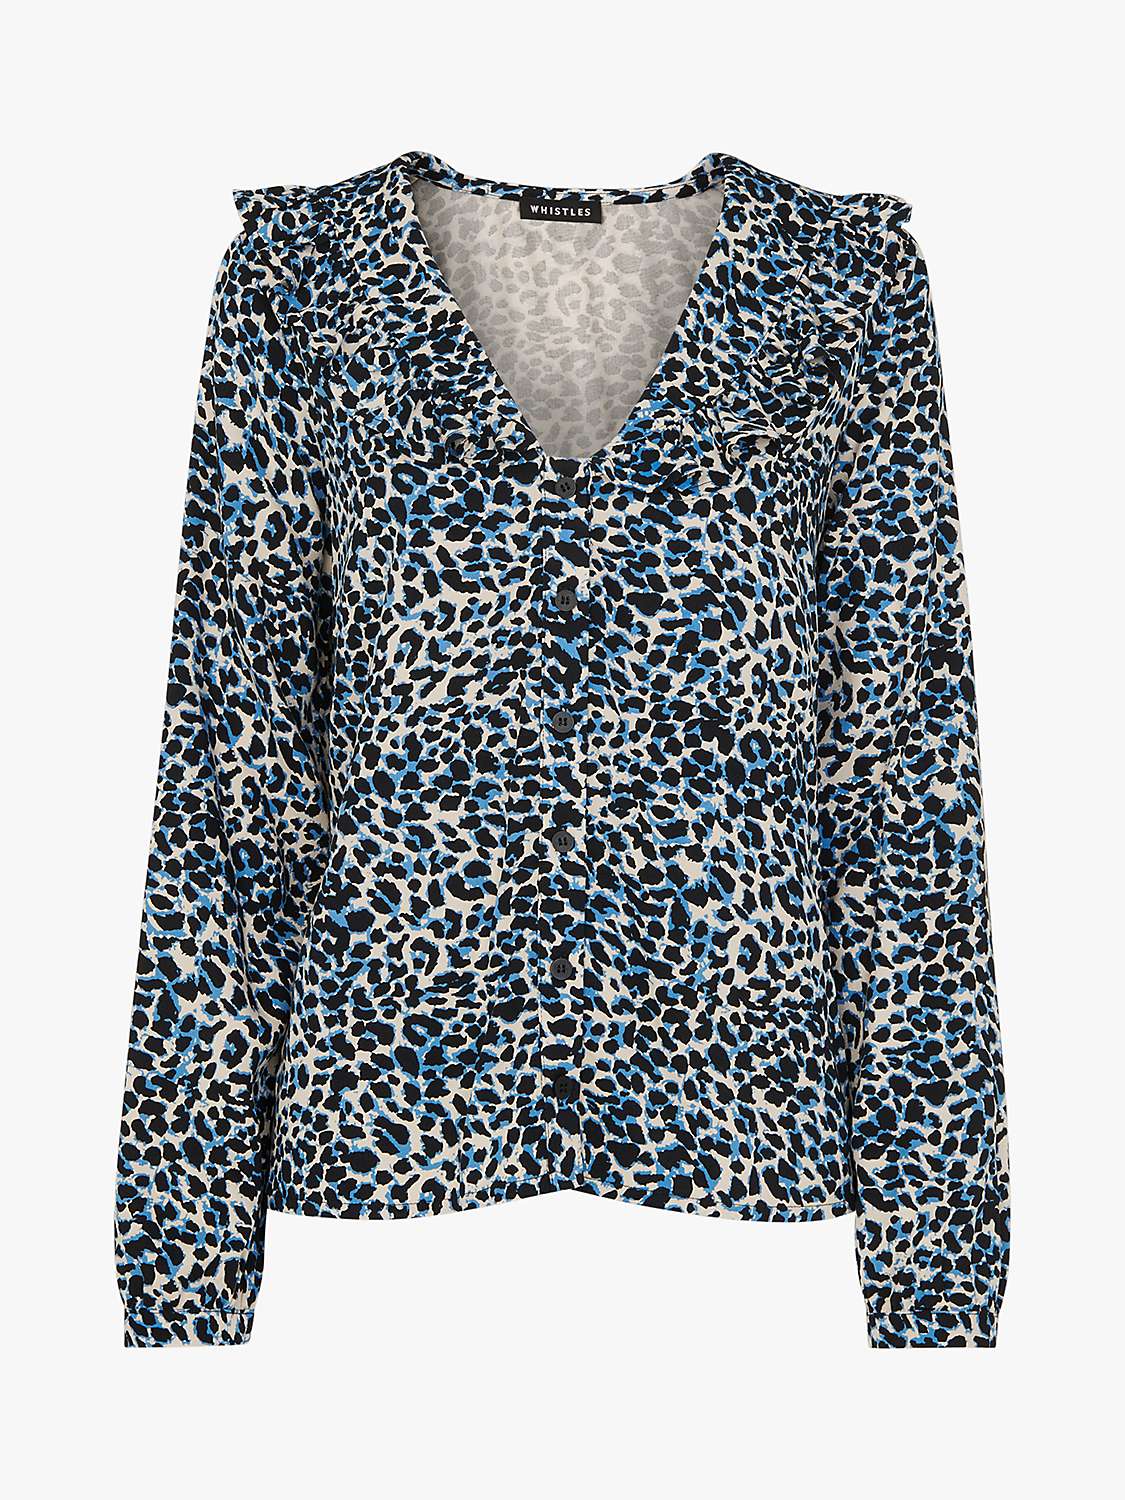 Buy Whistles Abstract Cheetah Lenny Collar Blouse, Multicolour Online at johnlewis.com